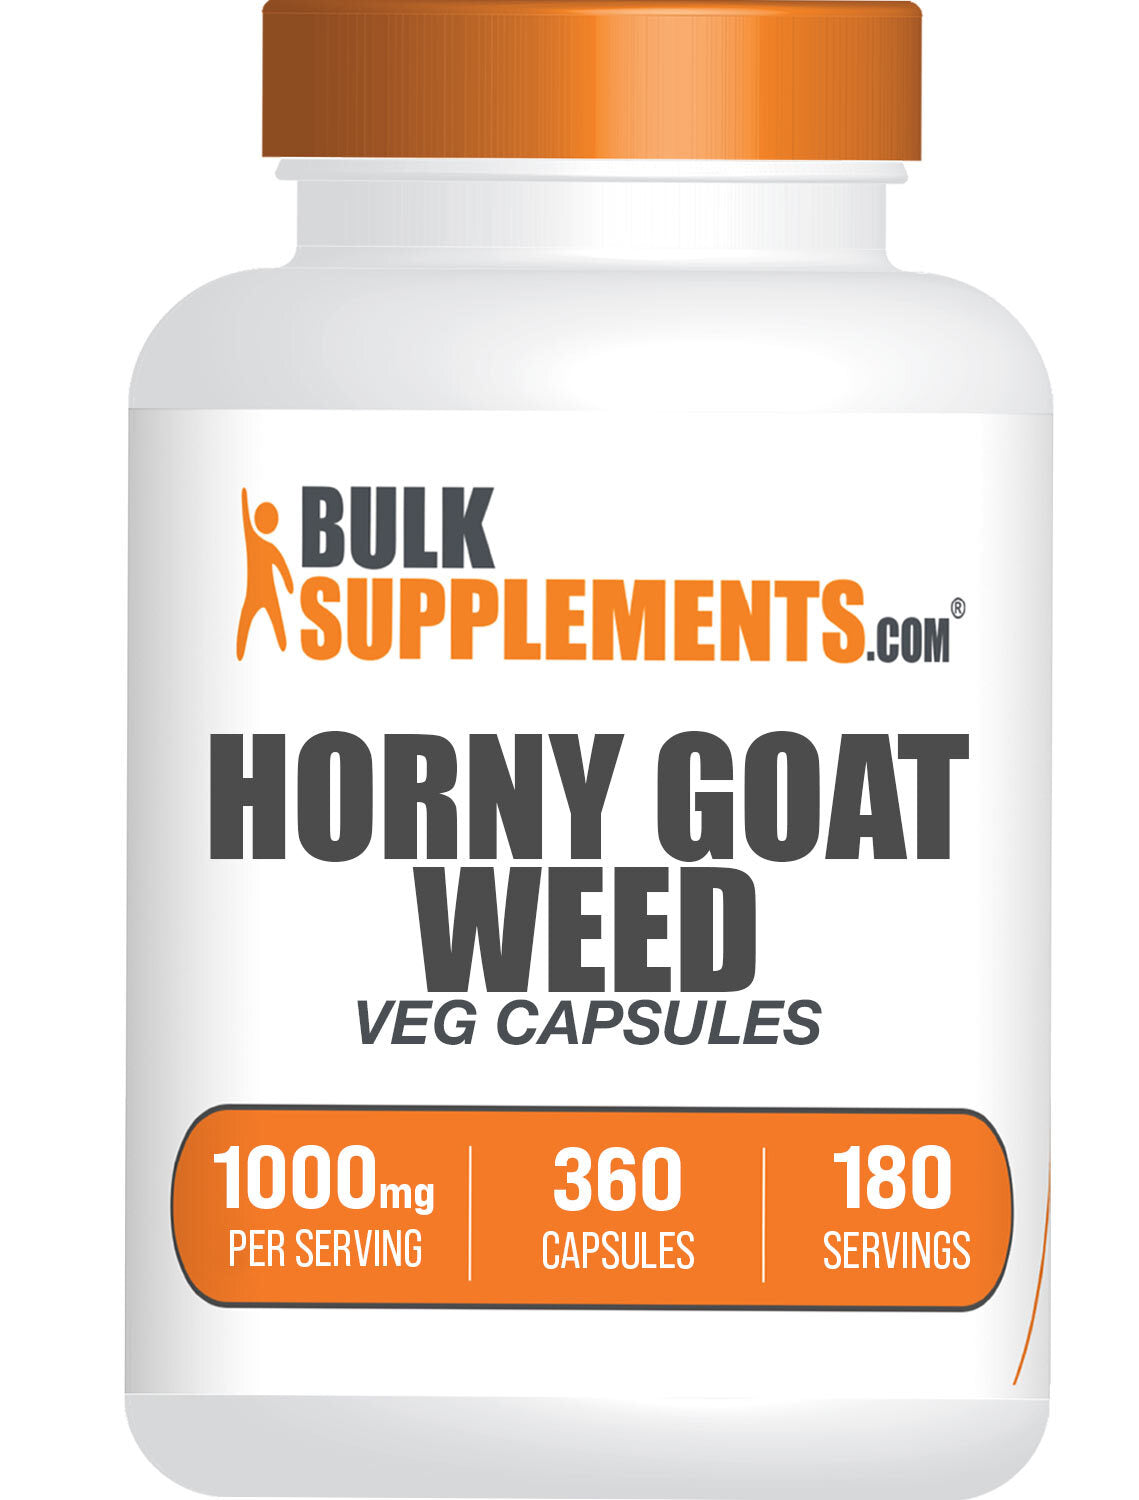 Horny Goat Weed Extract Capsules